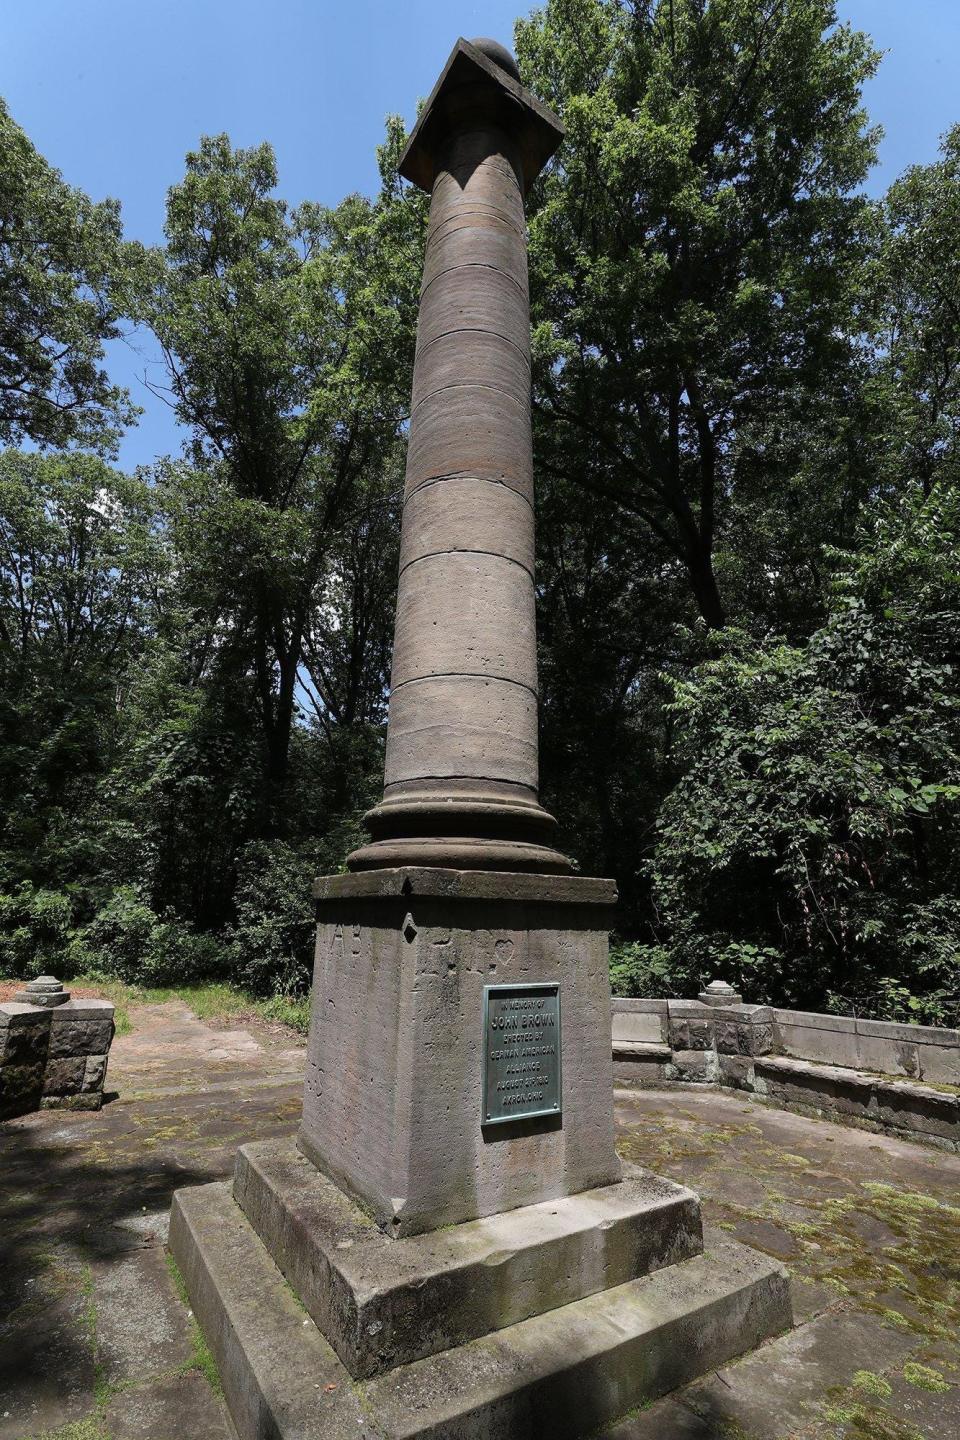 The John Brown Monument is tucked away in a wooded area atop an incline in the Akron Zoo.